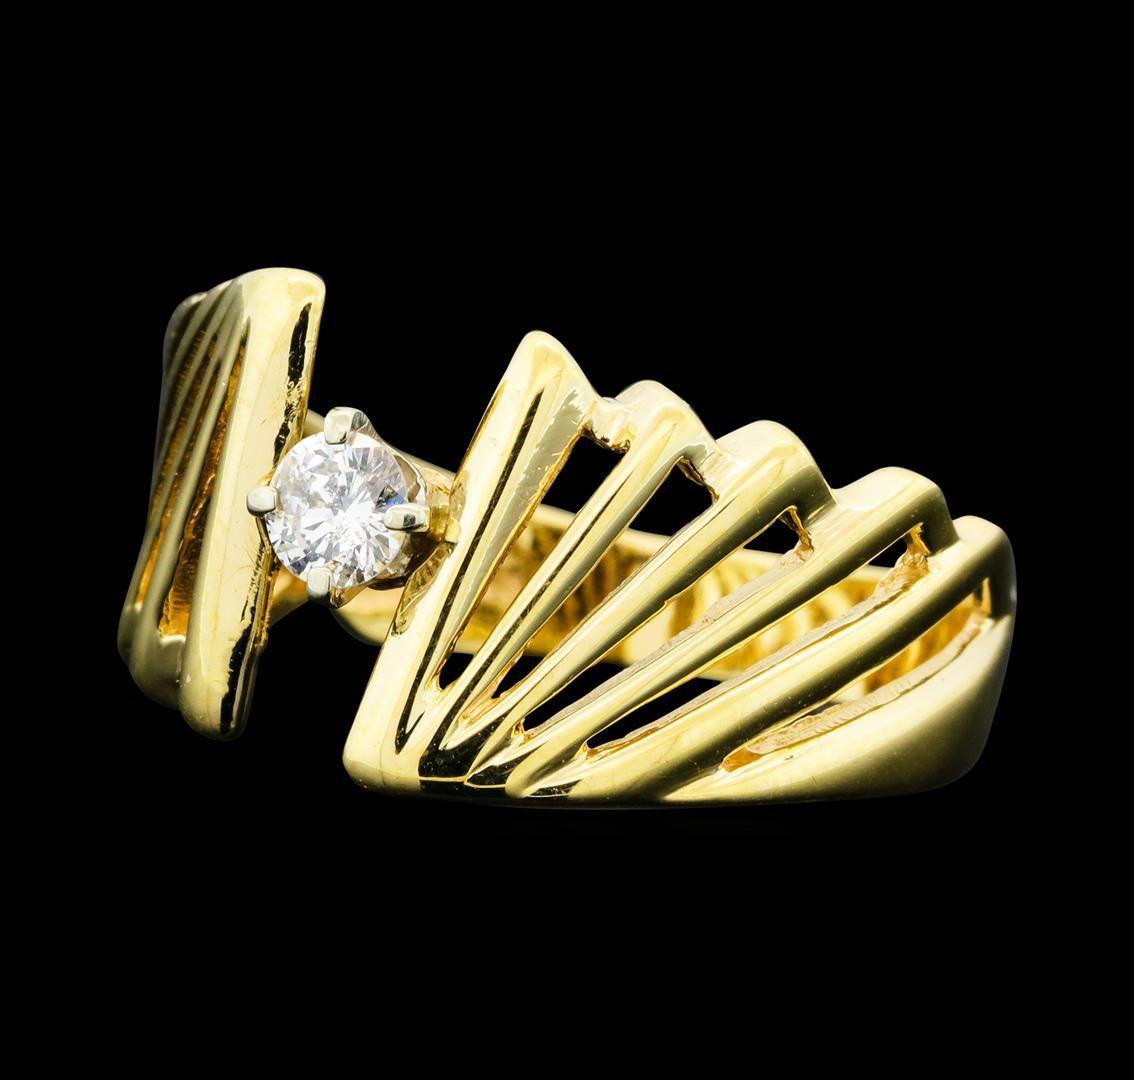 0.15 ctw Diamond Solitaire Ring - 14KT Yellow Gold